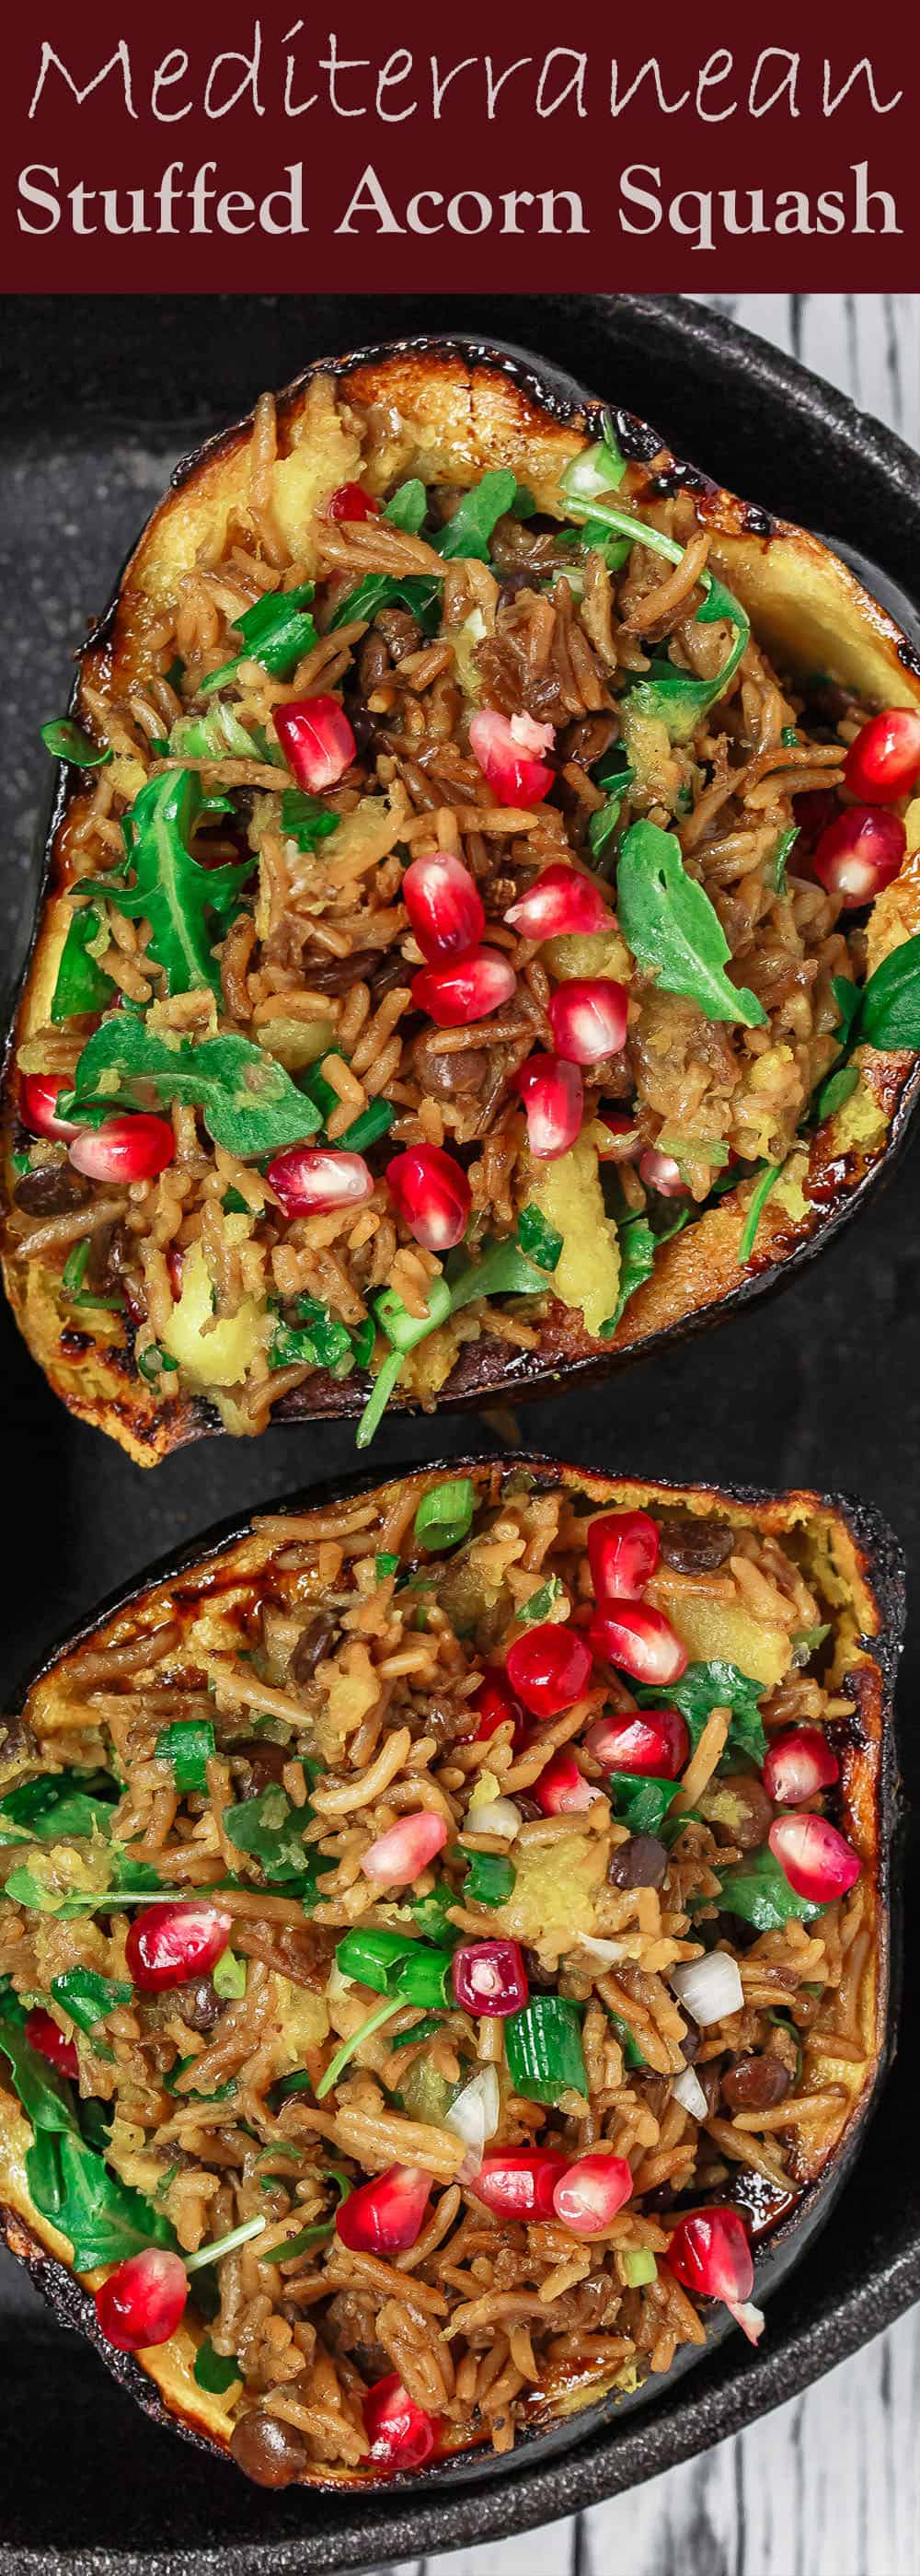 Mediterranean Style Stuffed Acorn Squash Recipe | The Mediterranean Dish.Simple all-start stuffed acorn squash recipe! Prepared Mediterranean-style with an easy rice and lentil pilaf mixture with fresh herbs and pomegranate seeds. A major shortcut makes all the difference! See the recipe on TheMediterraneanDish.com #acornsquash #mediterraneanrecipe #roastedsquash #squashrecipe #thanksigivingdinner